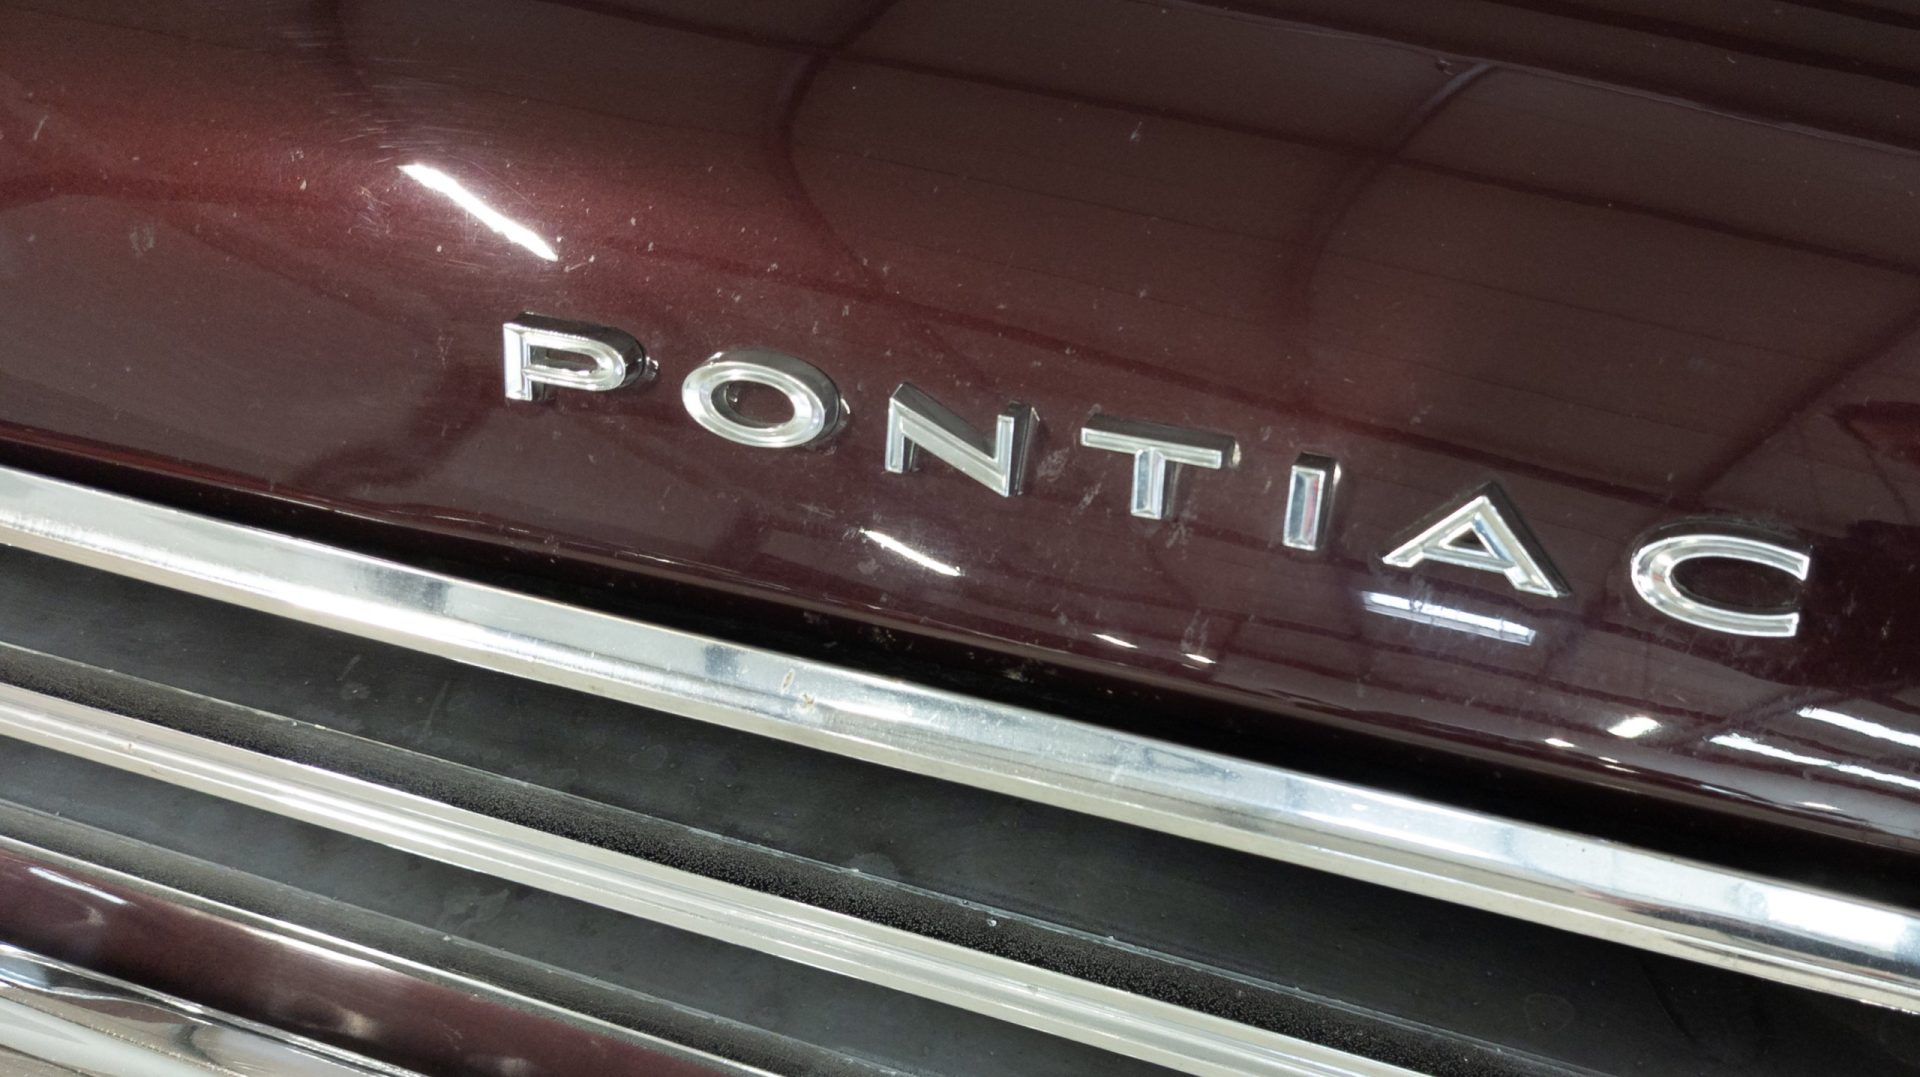 Pontiac logo brand and american sign text on vintage us car